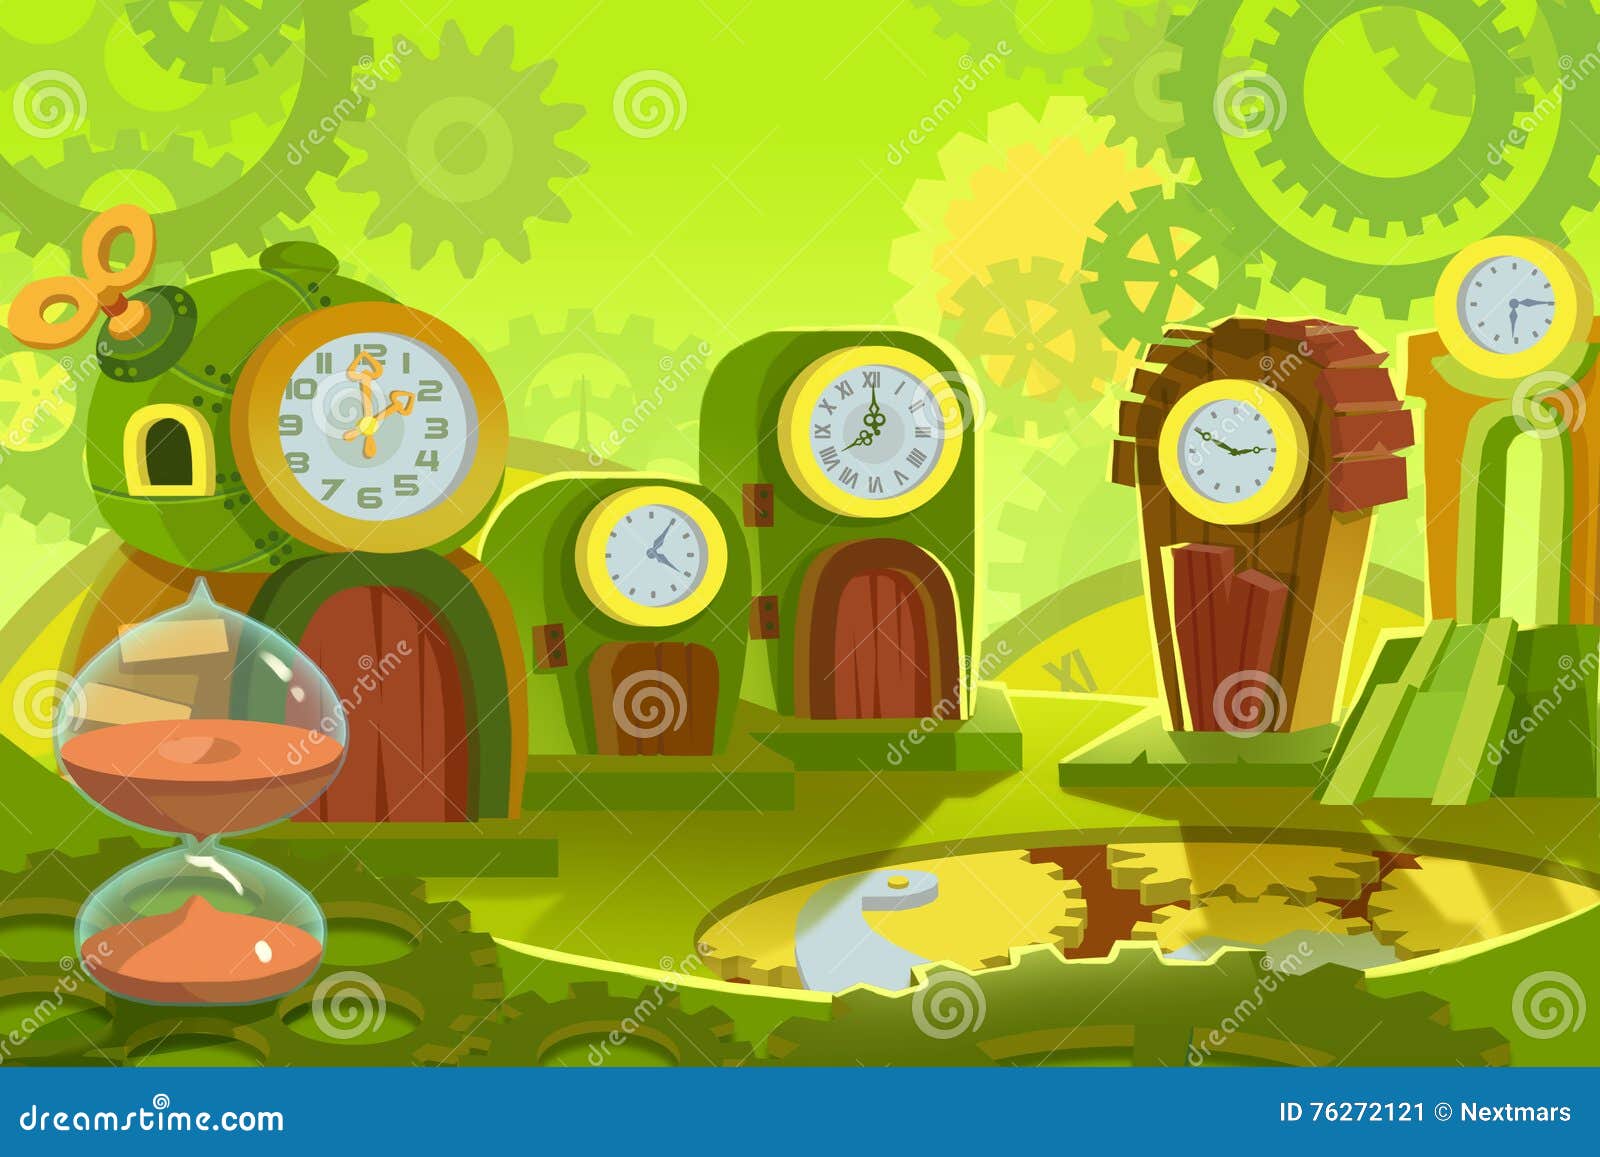 Creative Illustration and Innovative Art: Background Set 6: Time Land.  Stock Illustration - Illustration of concept, drawing: 76272121